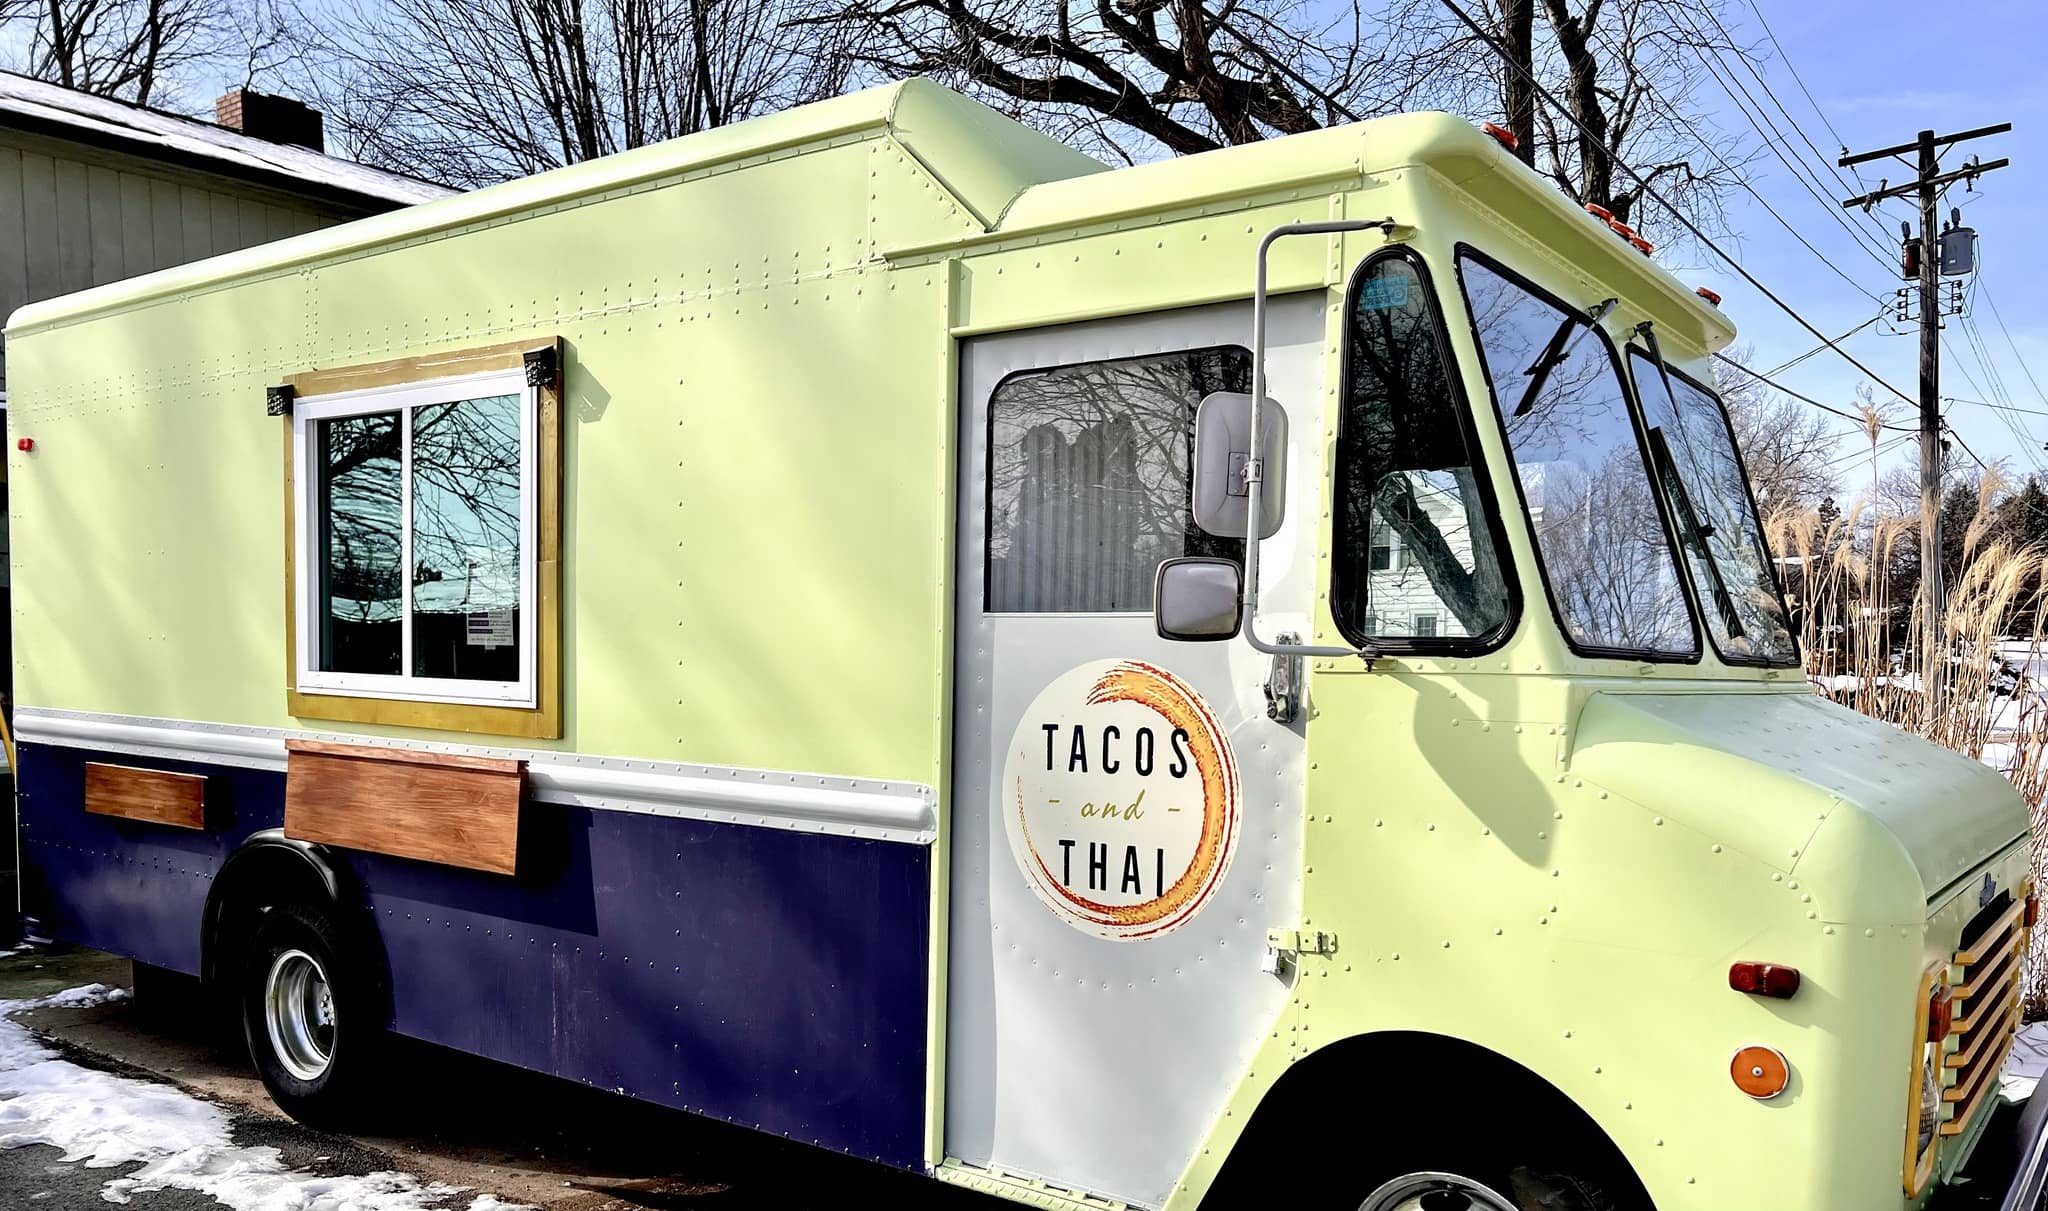 Have Tacos and Thai, will travel. New food truck to feature locally sourced items around Galesburg